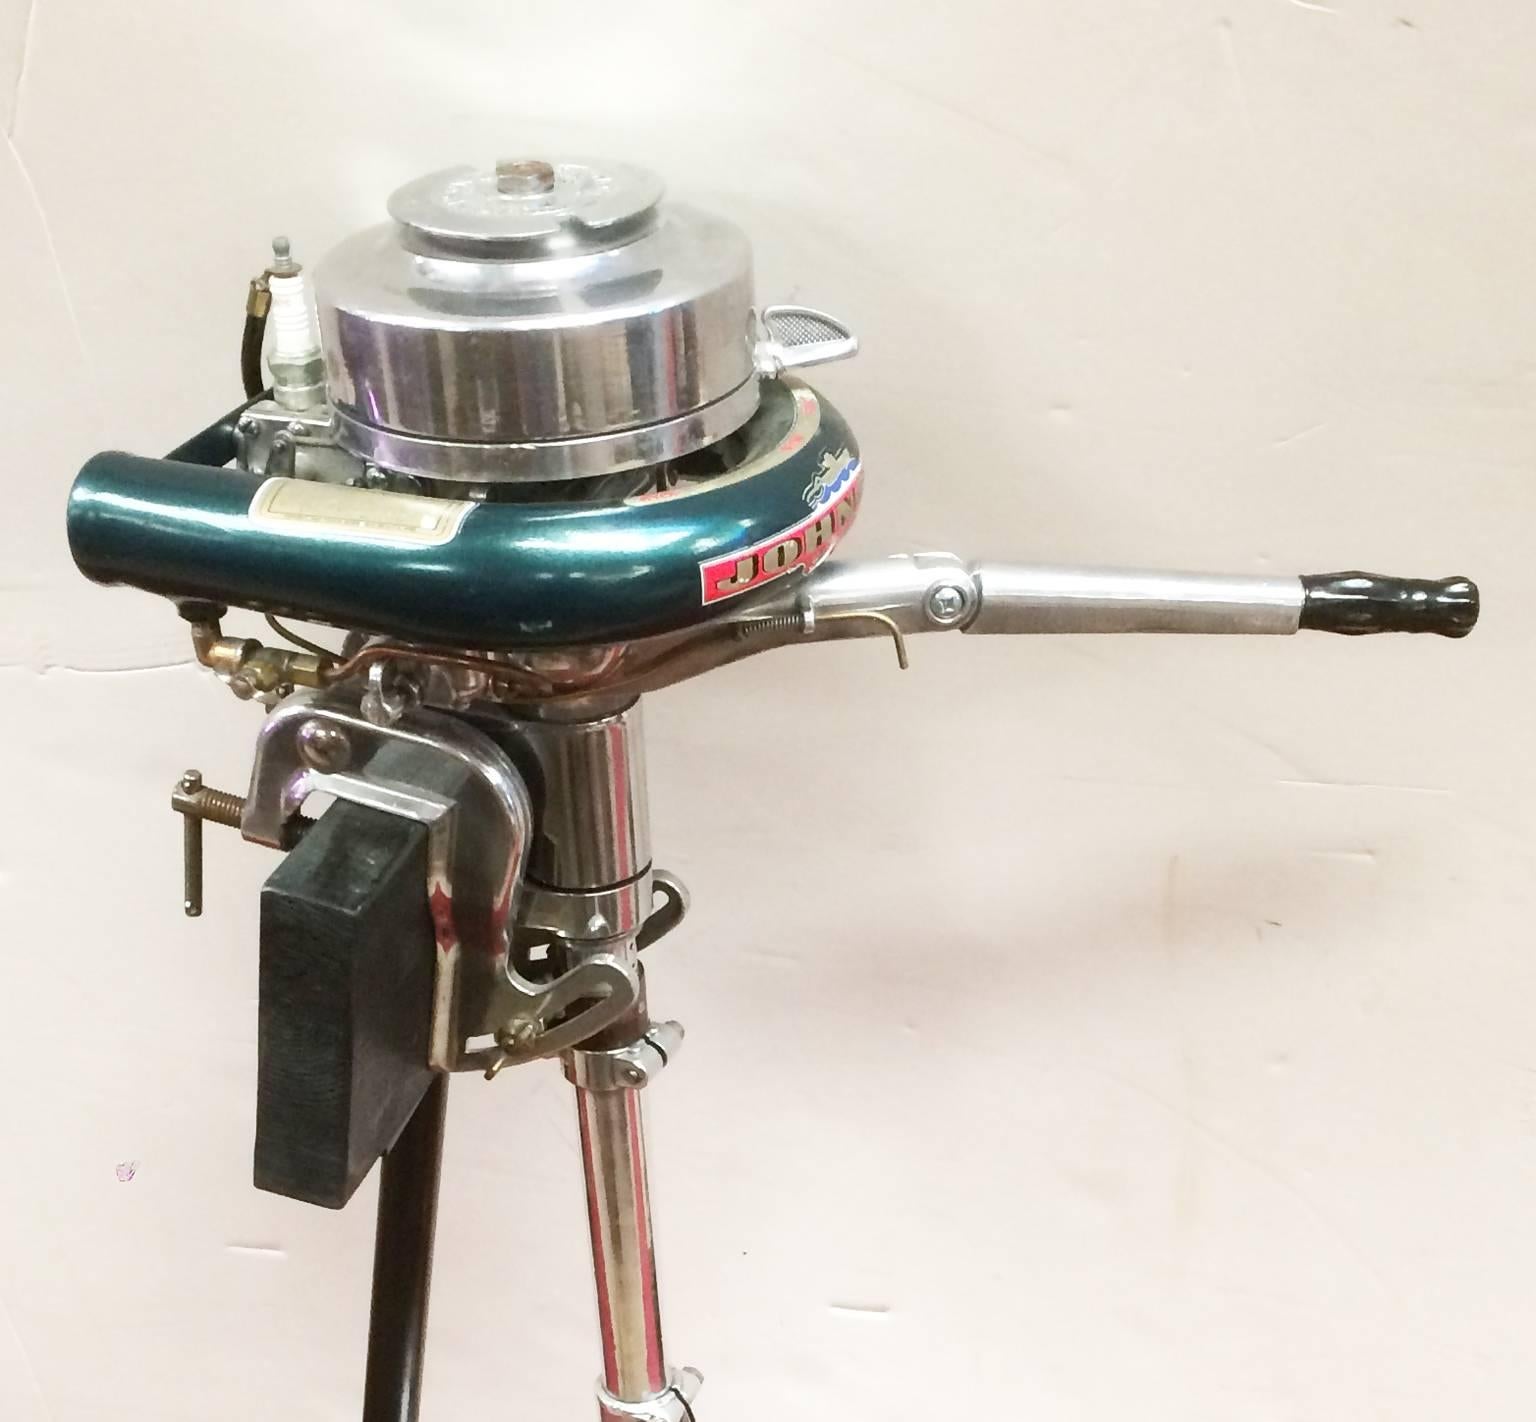 Johnson model MS-39 outboard motor on stand. Collectible condition with decals and polished chrome.